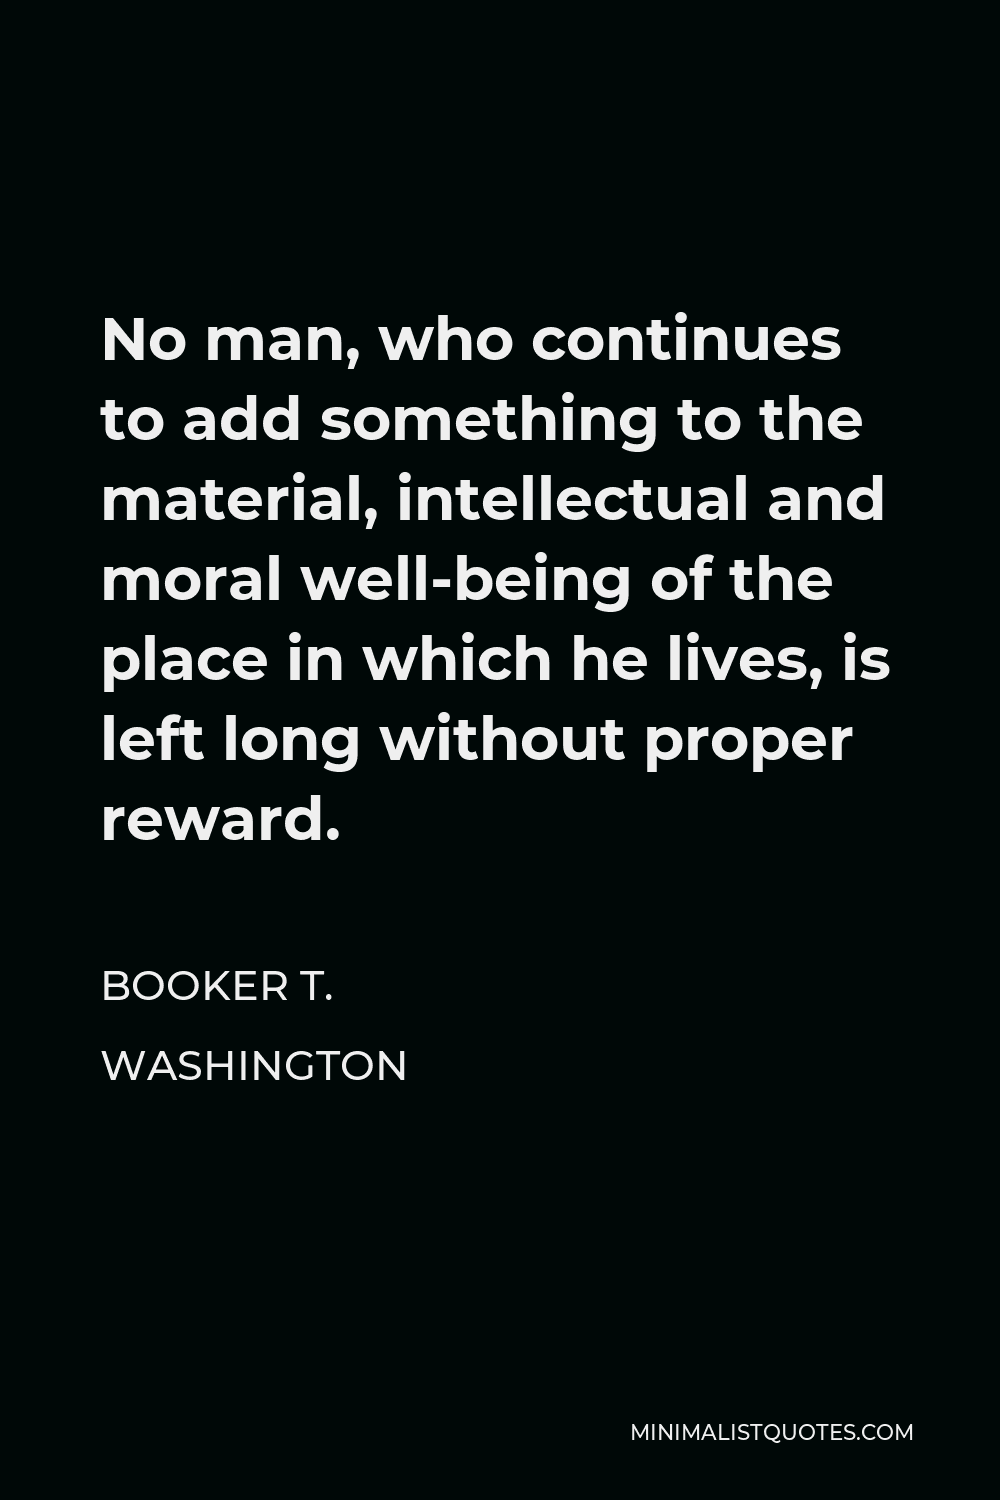 Booker T. Washington Quote - No man, who continues to add something to the material, intellectual and moral well-being of the place in which he lives, is left long without proper reward.